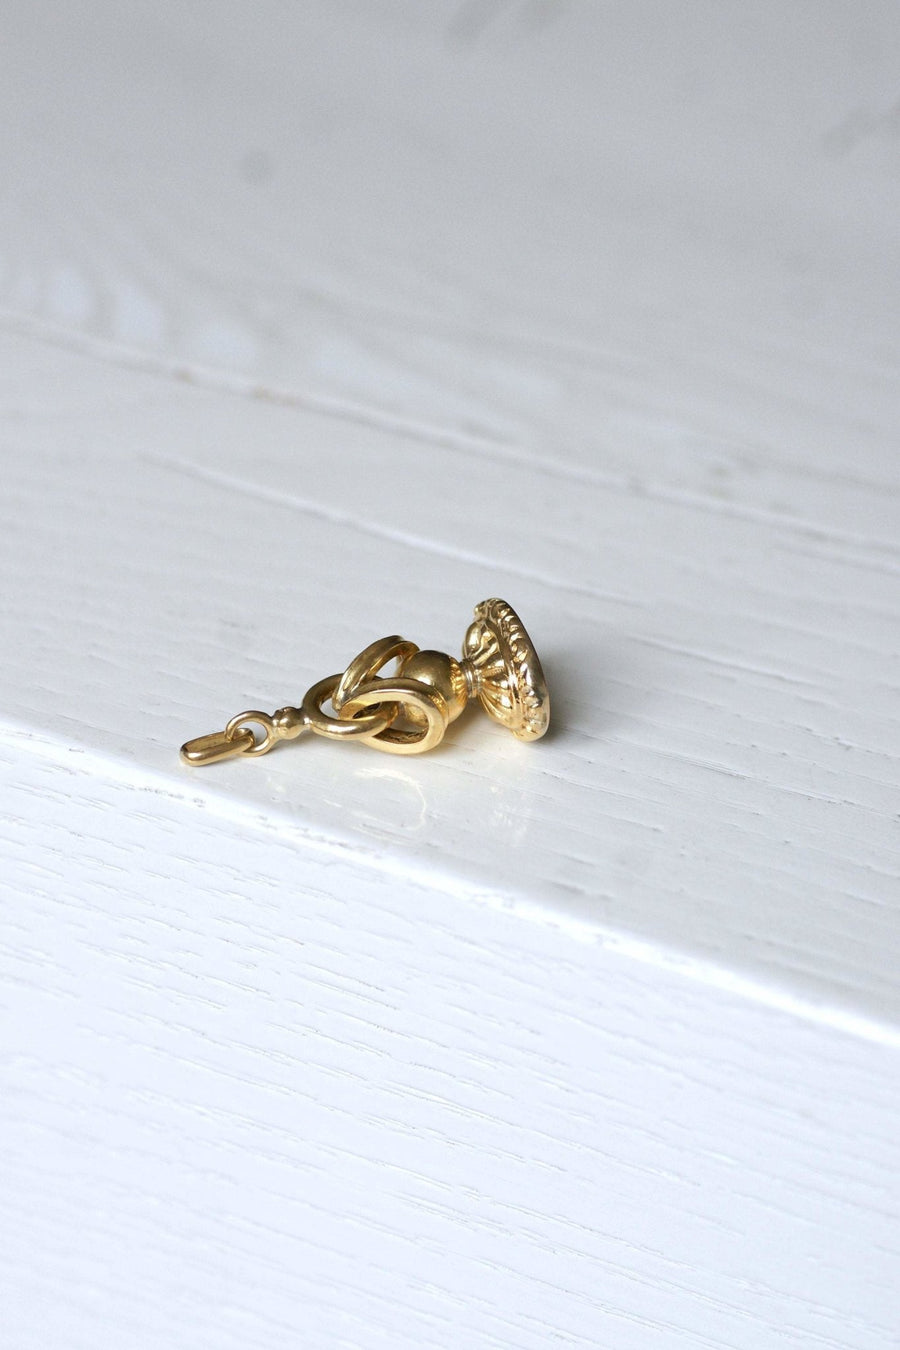 Antique Victorian Seal Pendant in Yellow Gold - Penelope Gallery